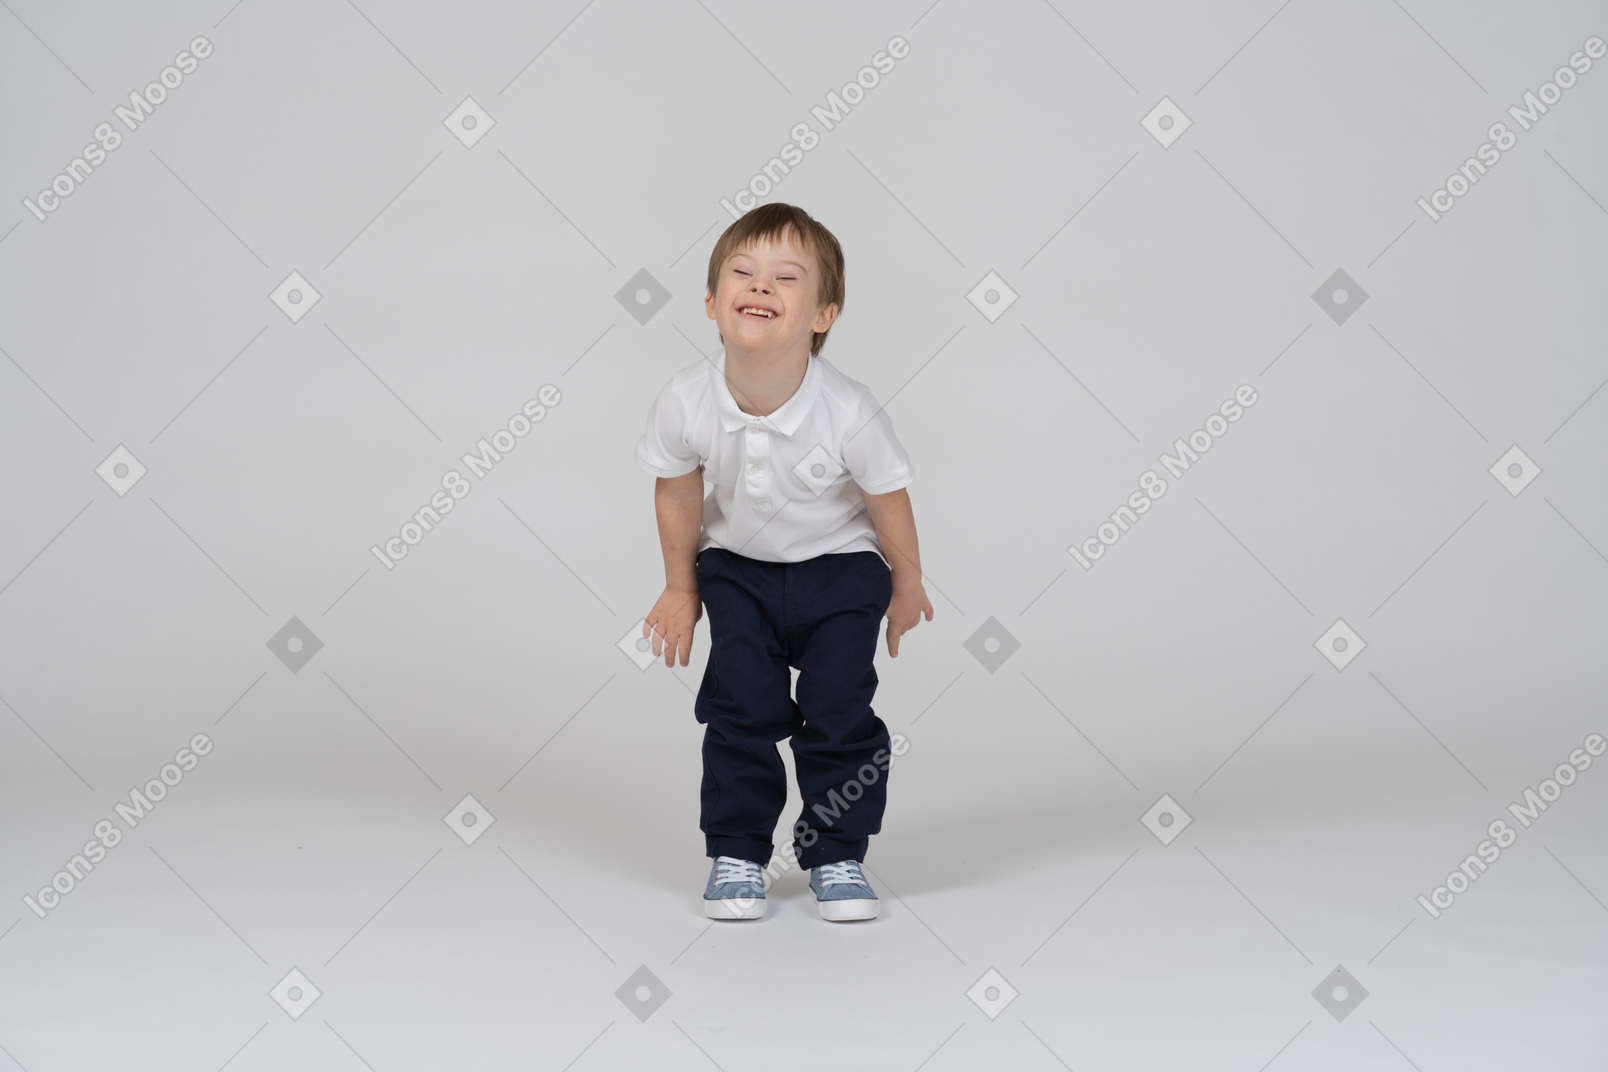 Front view of cheerful boy getting ready to jump